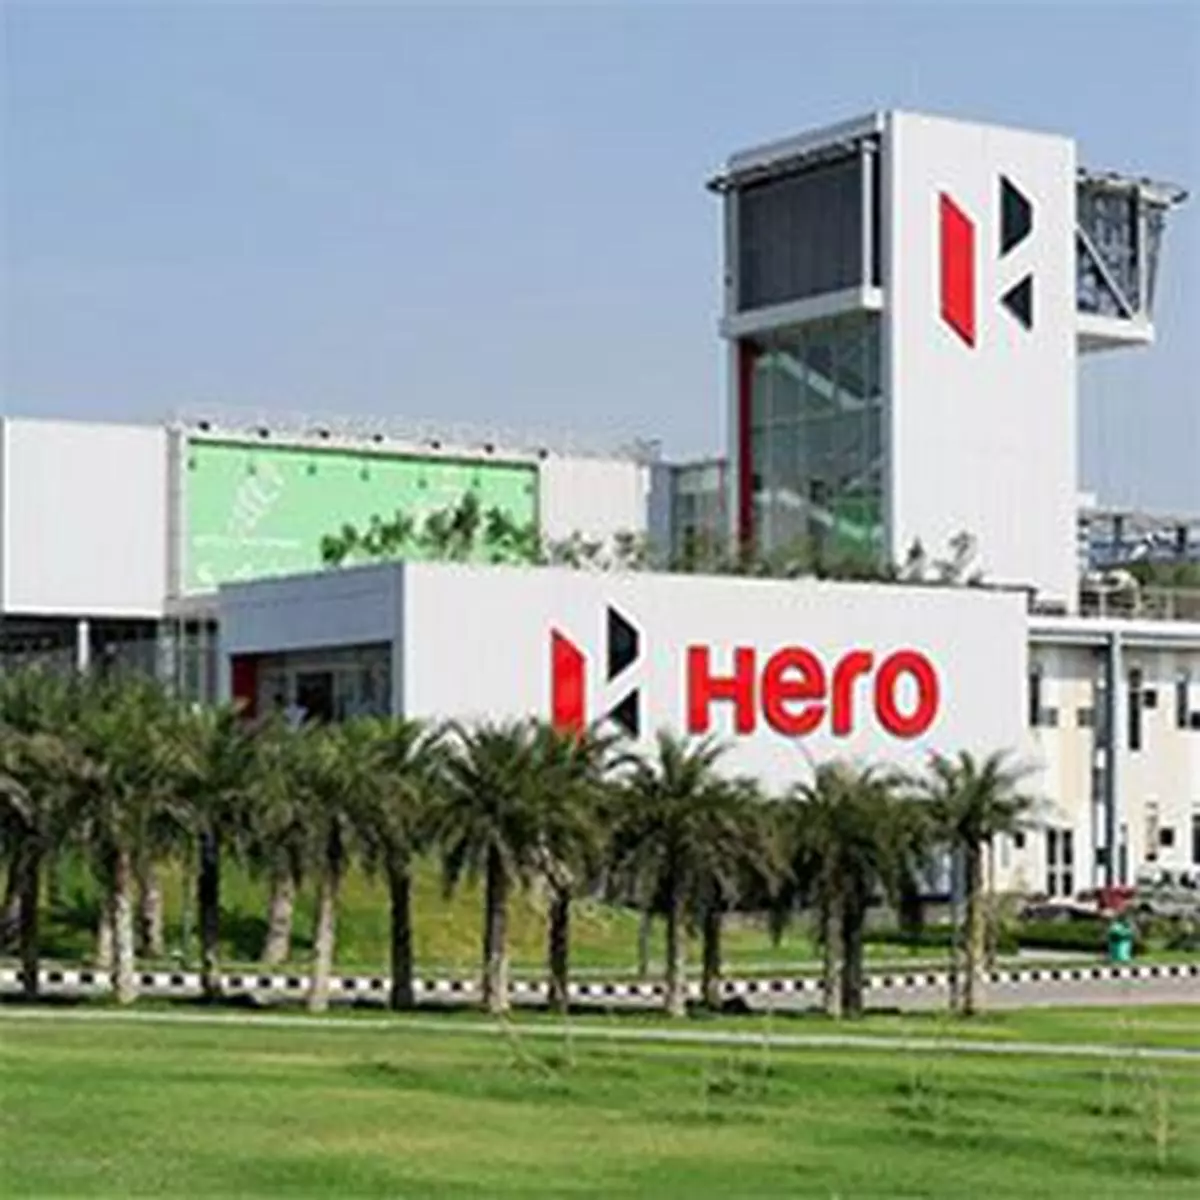 Hero MotoCorp will claim its position in the exciting clean mobility space in a bold avatar.